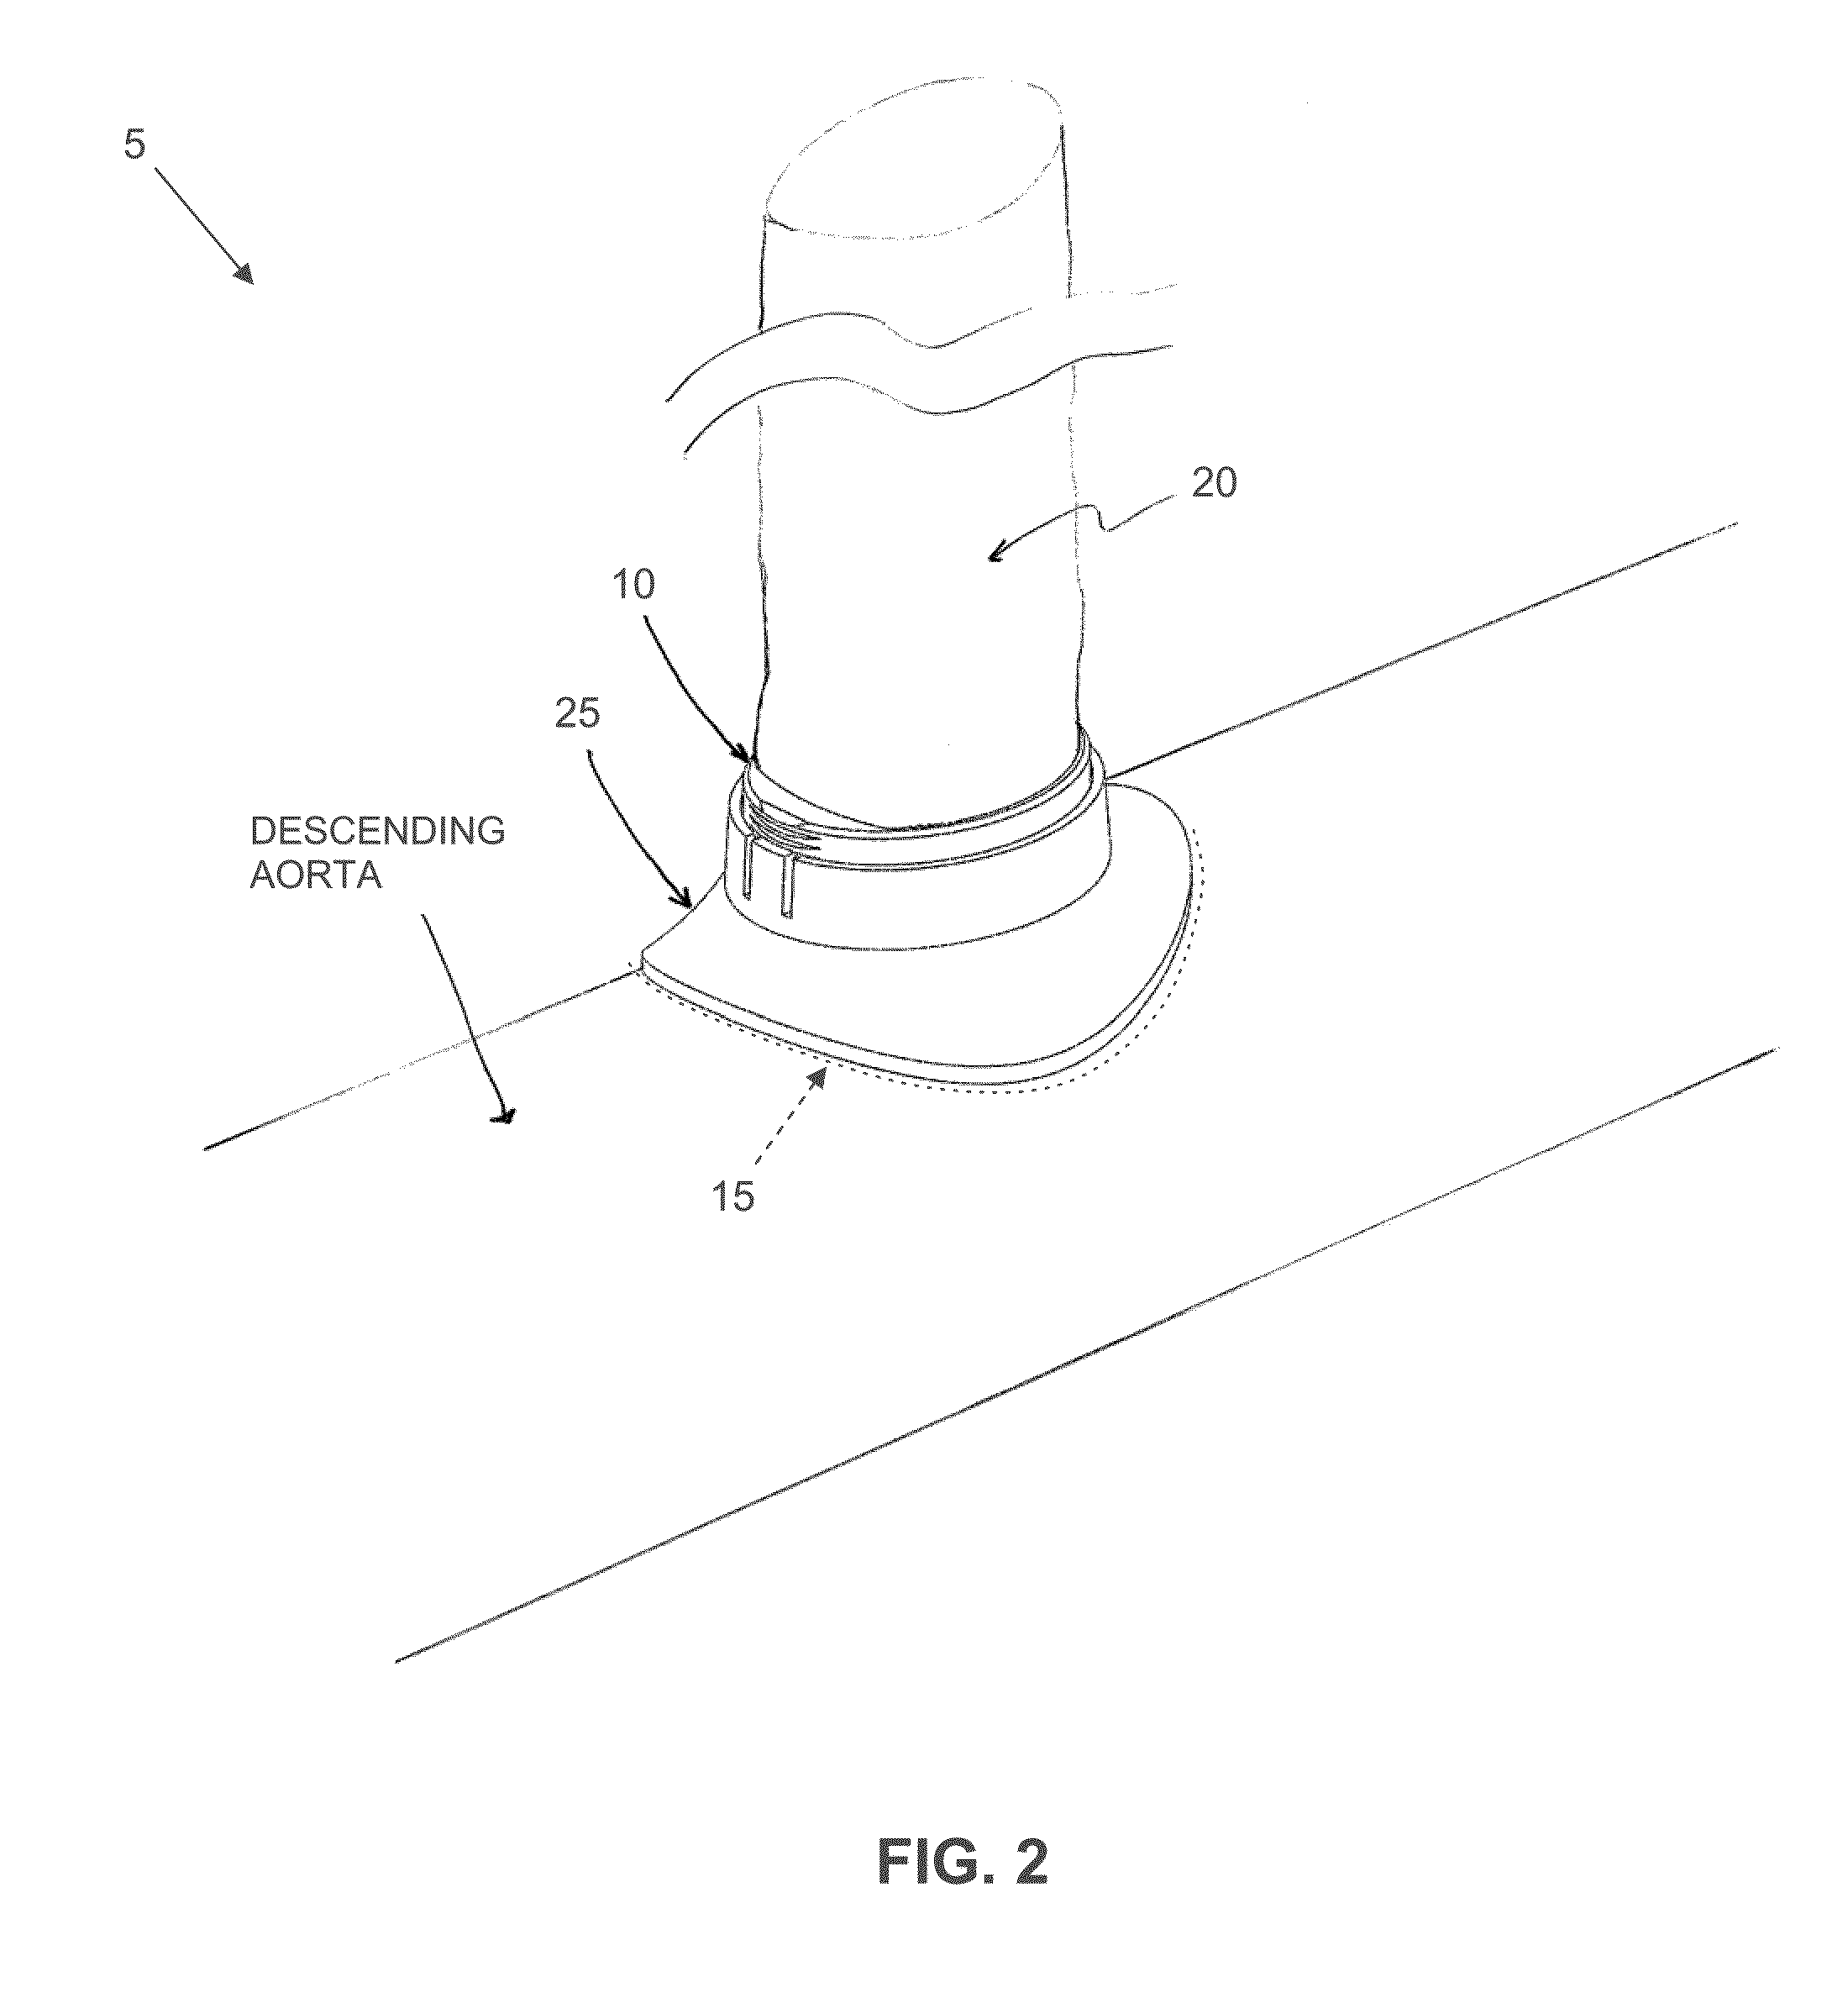 Method and apparatus for effecting a minimally invasive distal anastomosis for an aortic valve bypass